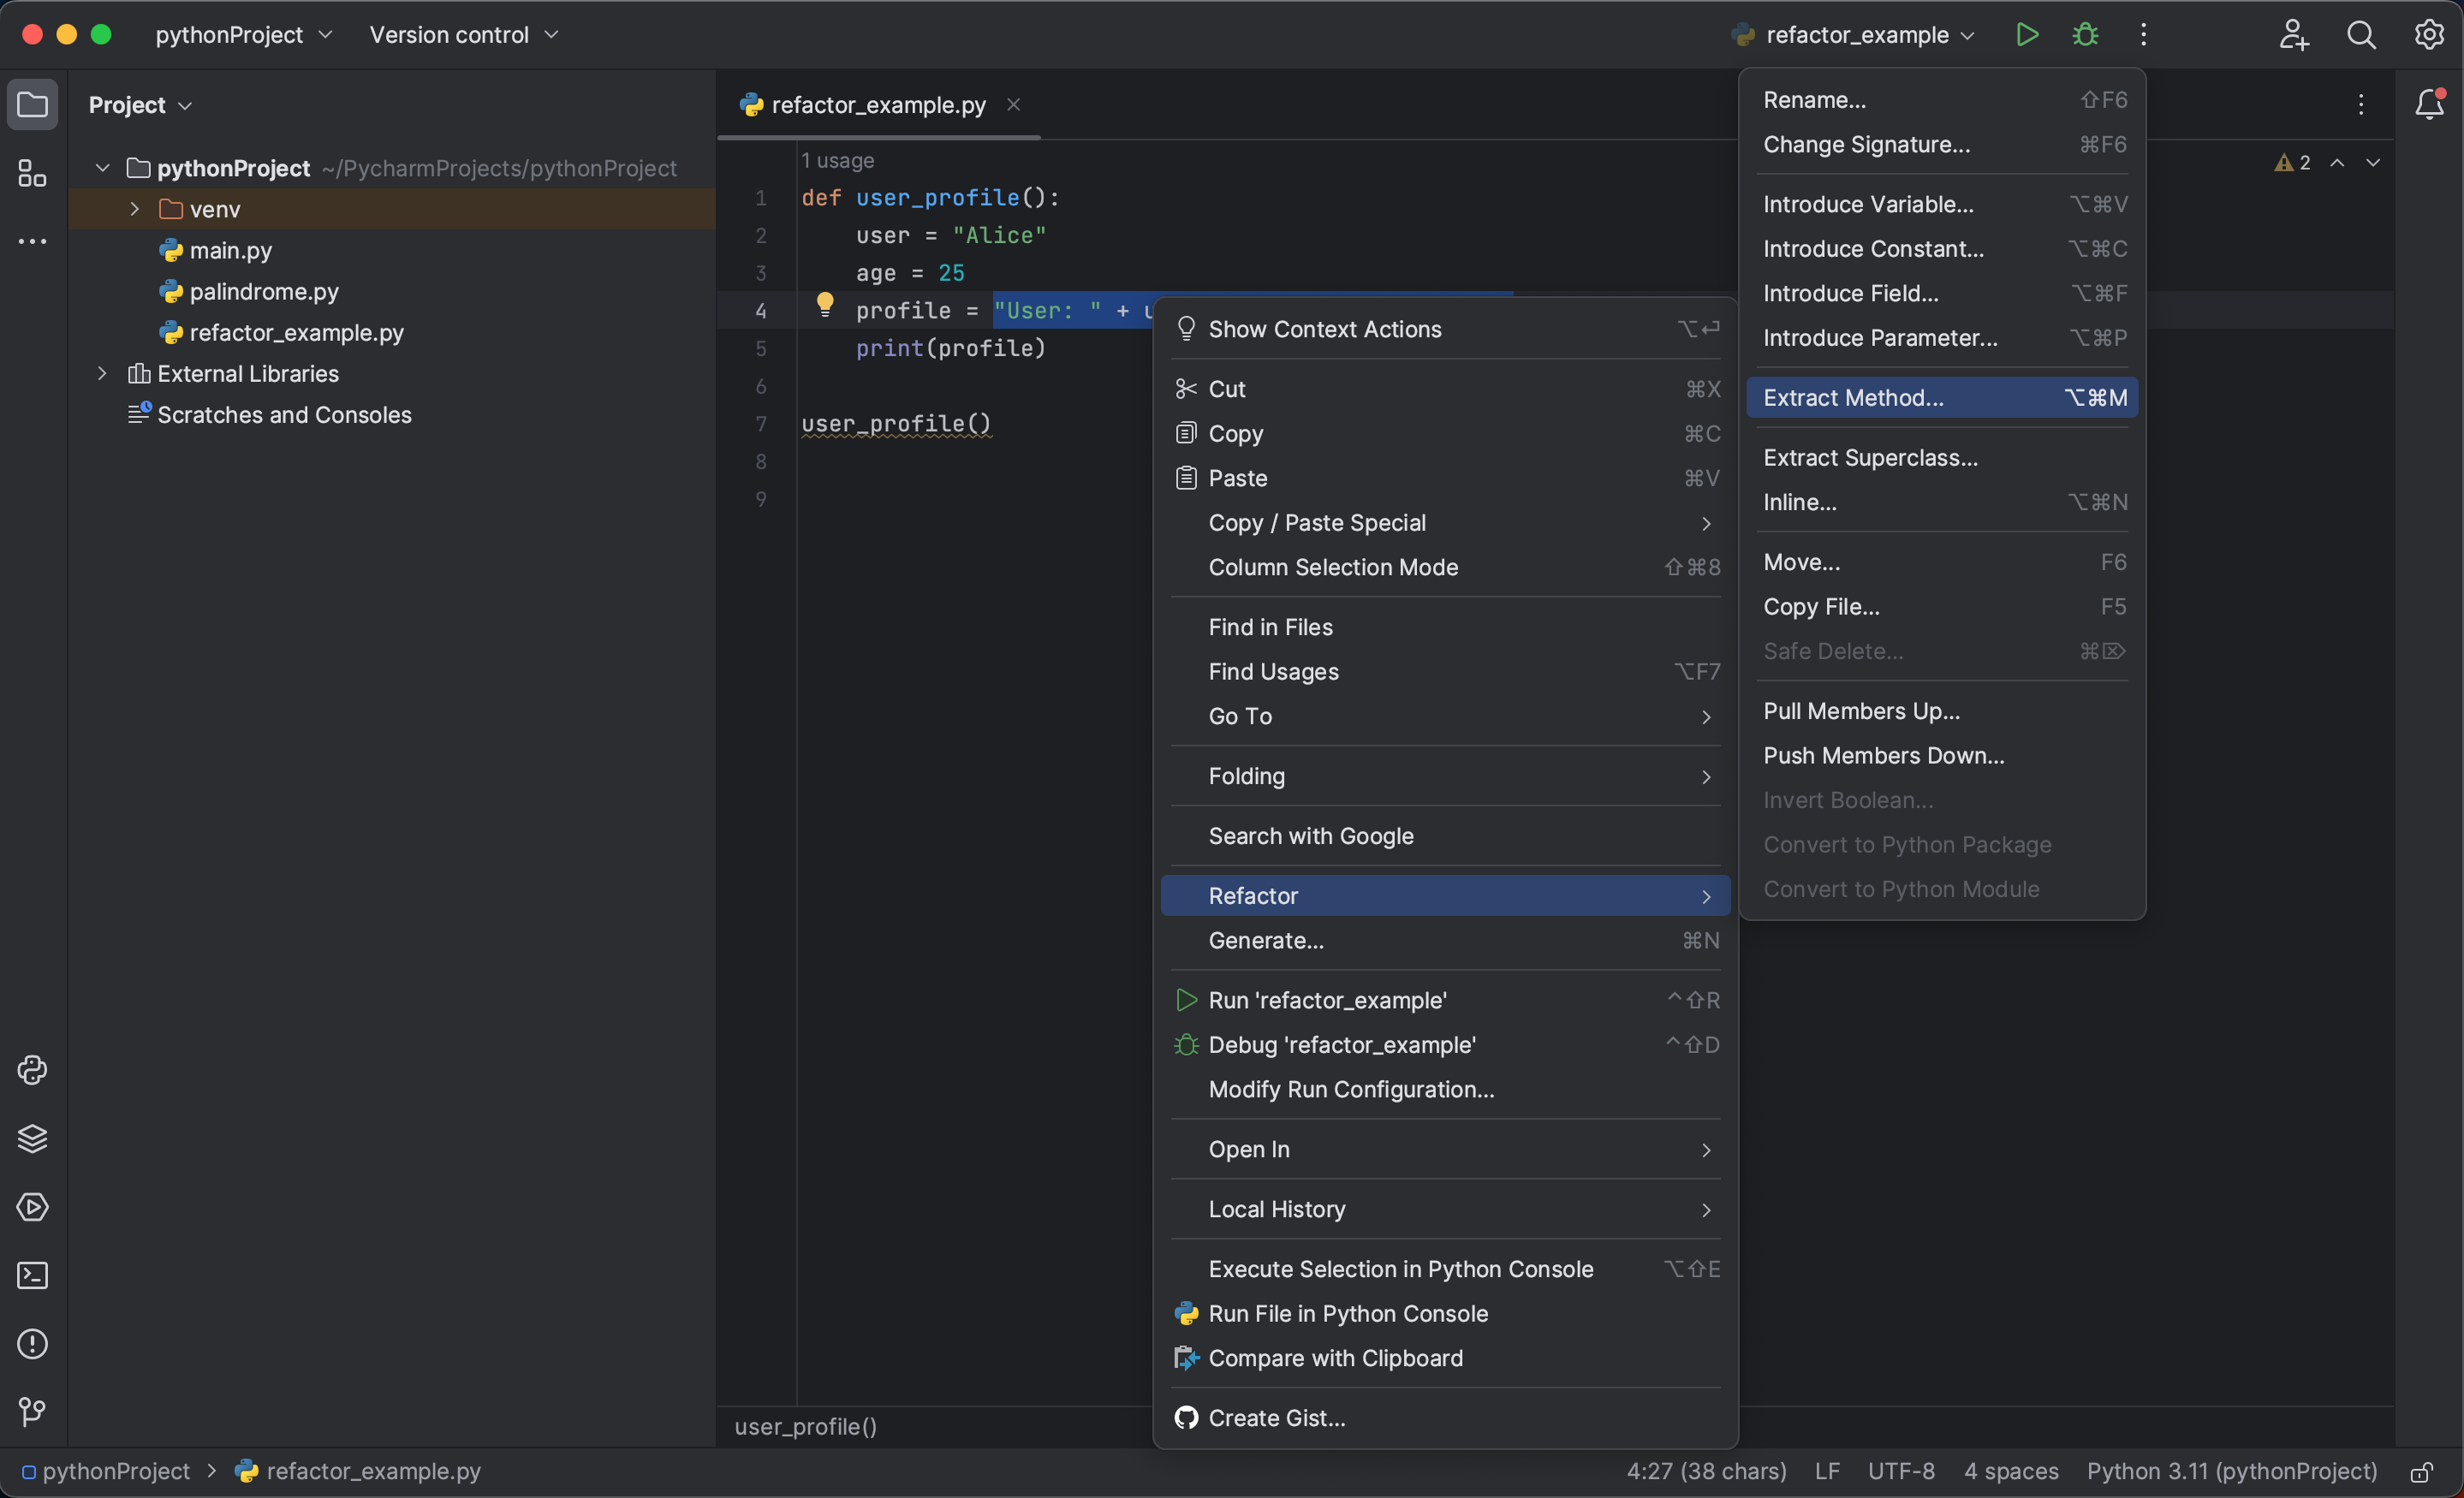 Screenshot illustrating the process of extracting a method in PyCharm